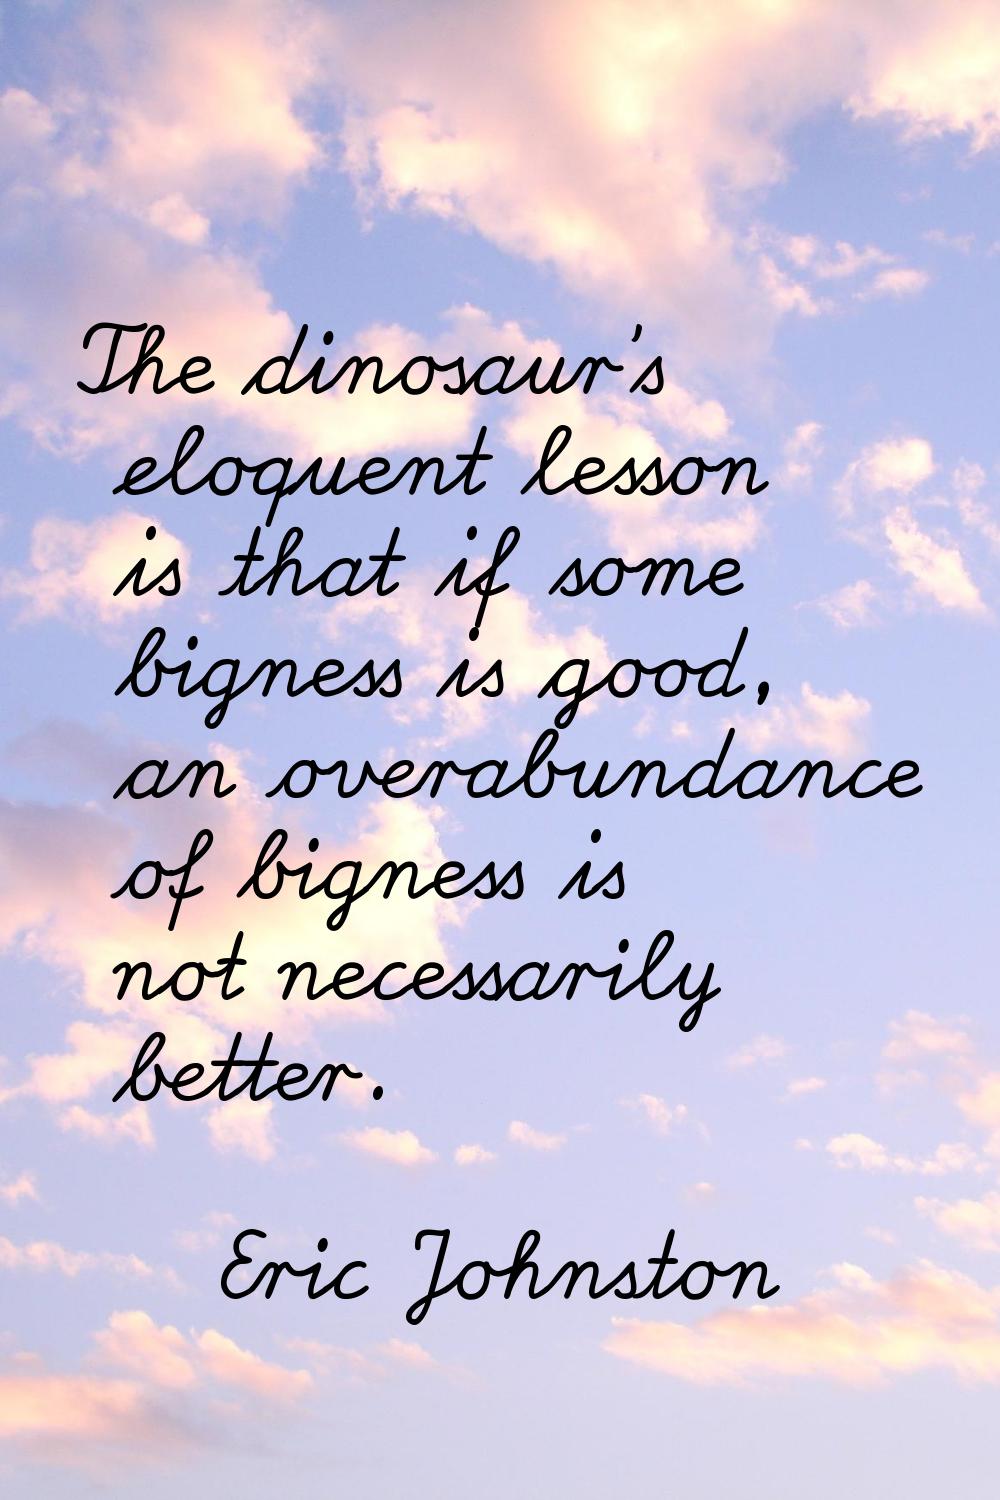 The dinosaur's eloquent lesson is that if some bigness is good, an overabundance of bigness is not 